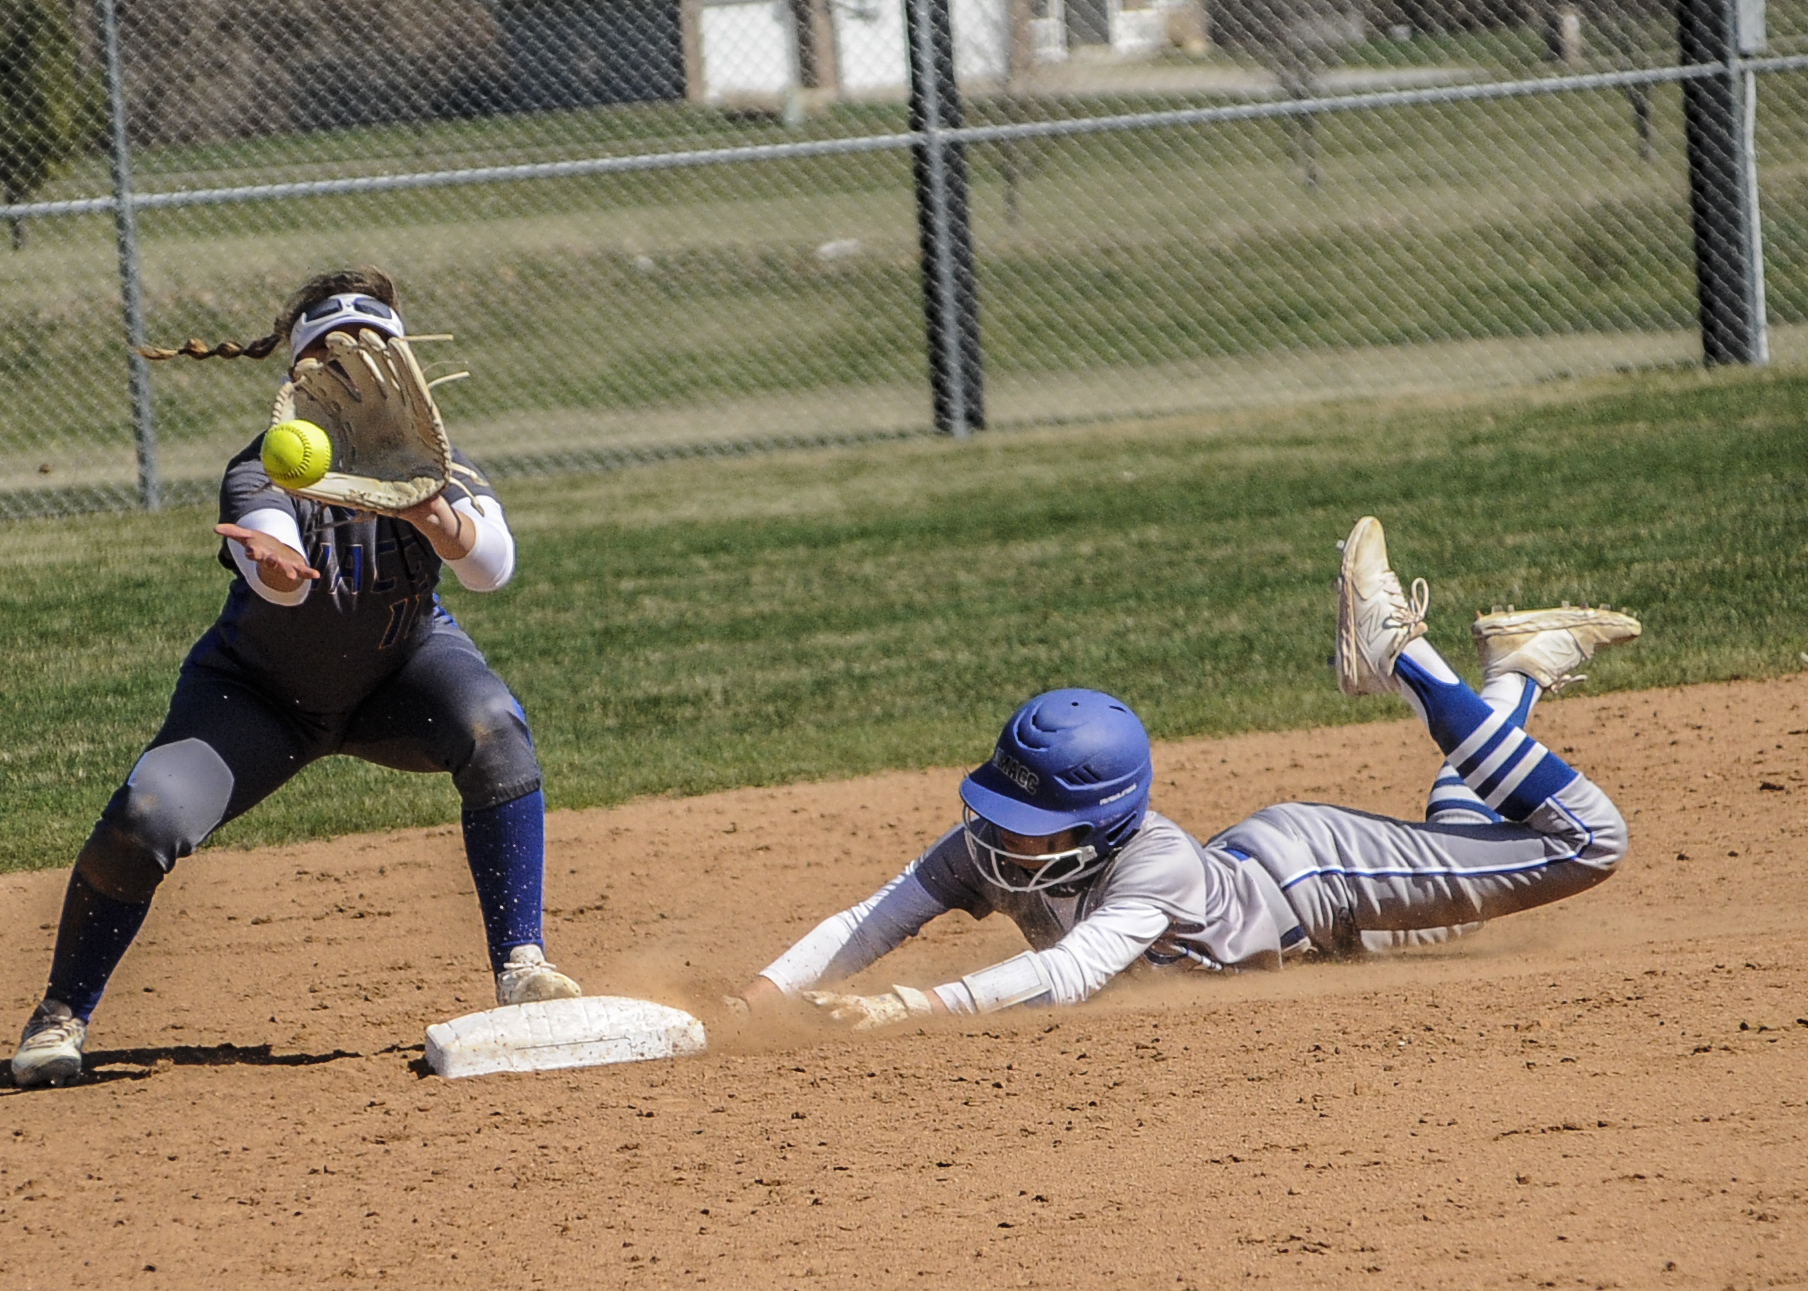 Bats explode in doubleheader sweep of NIACC